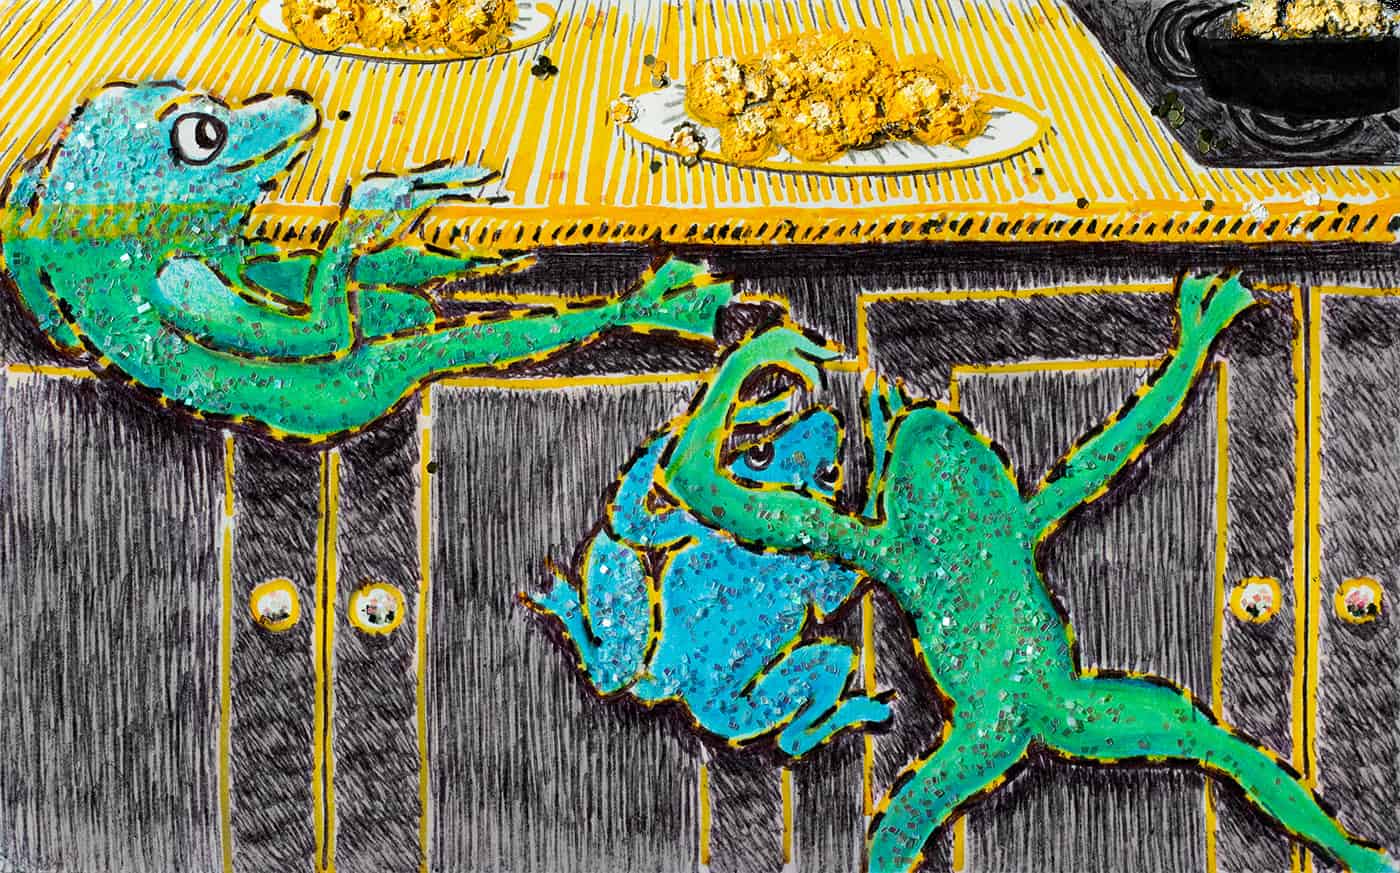 drawings of frogs sneaking up on a plate of potato latkes